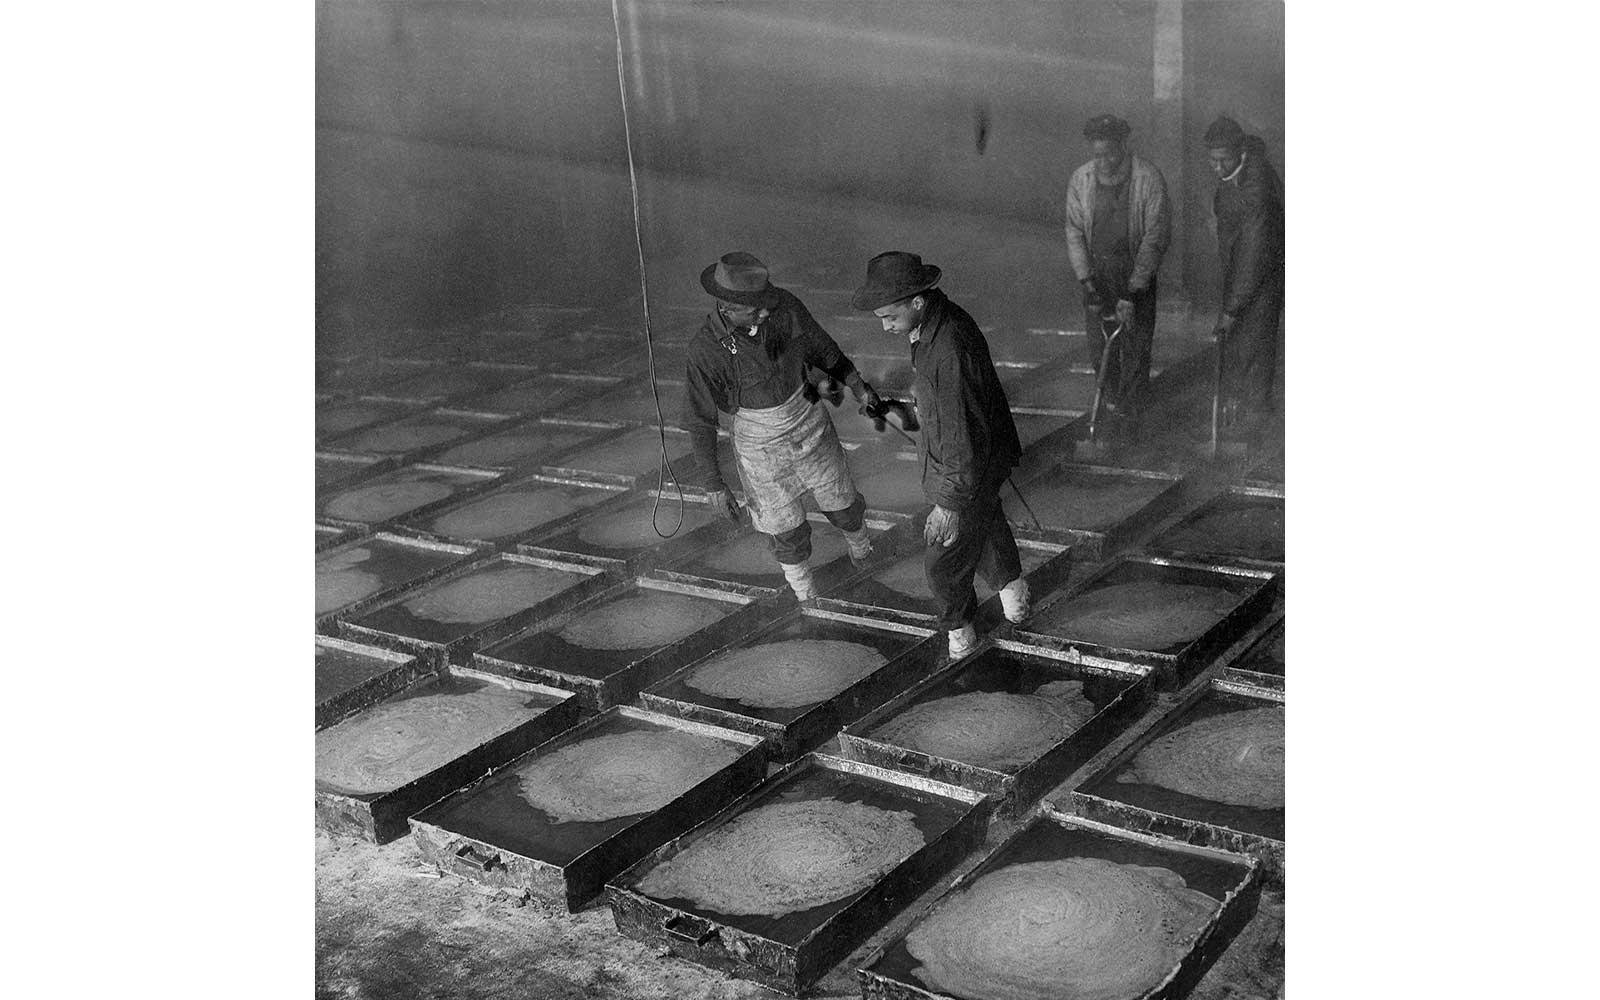 Gordon Parks, Two workmen pulling pans of red hot grease that has just been poured from a cooking kettle. After it is cooled it can be lifted out in solid chunks and carried away on flat cars, March 1944.